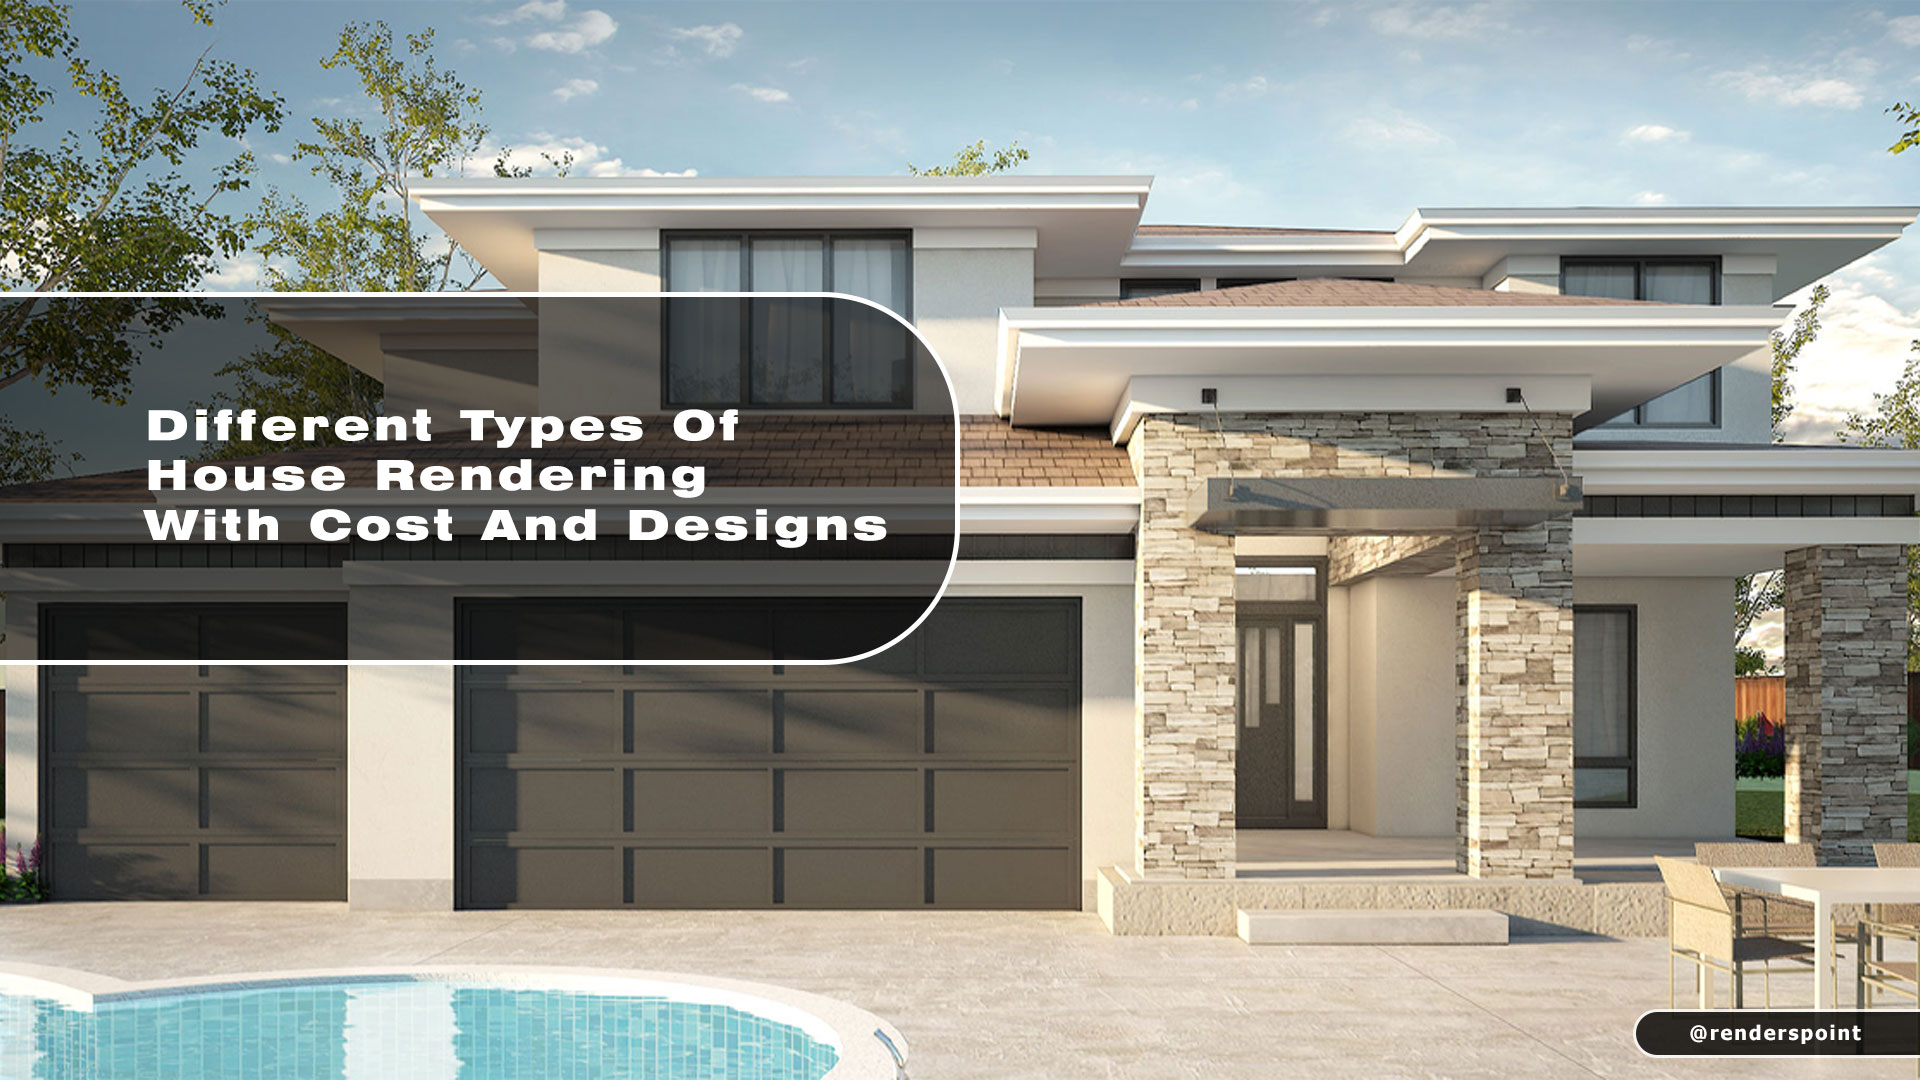 Different Types of House Rendering With Cost and Designs